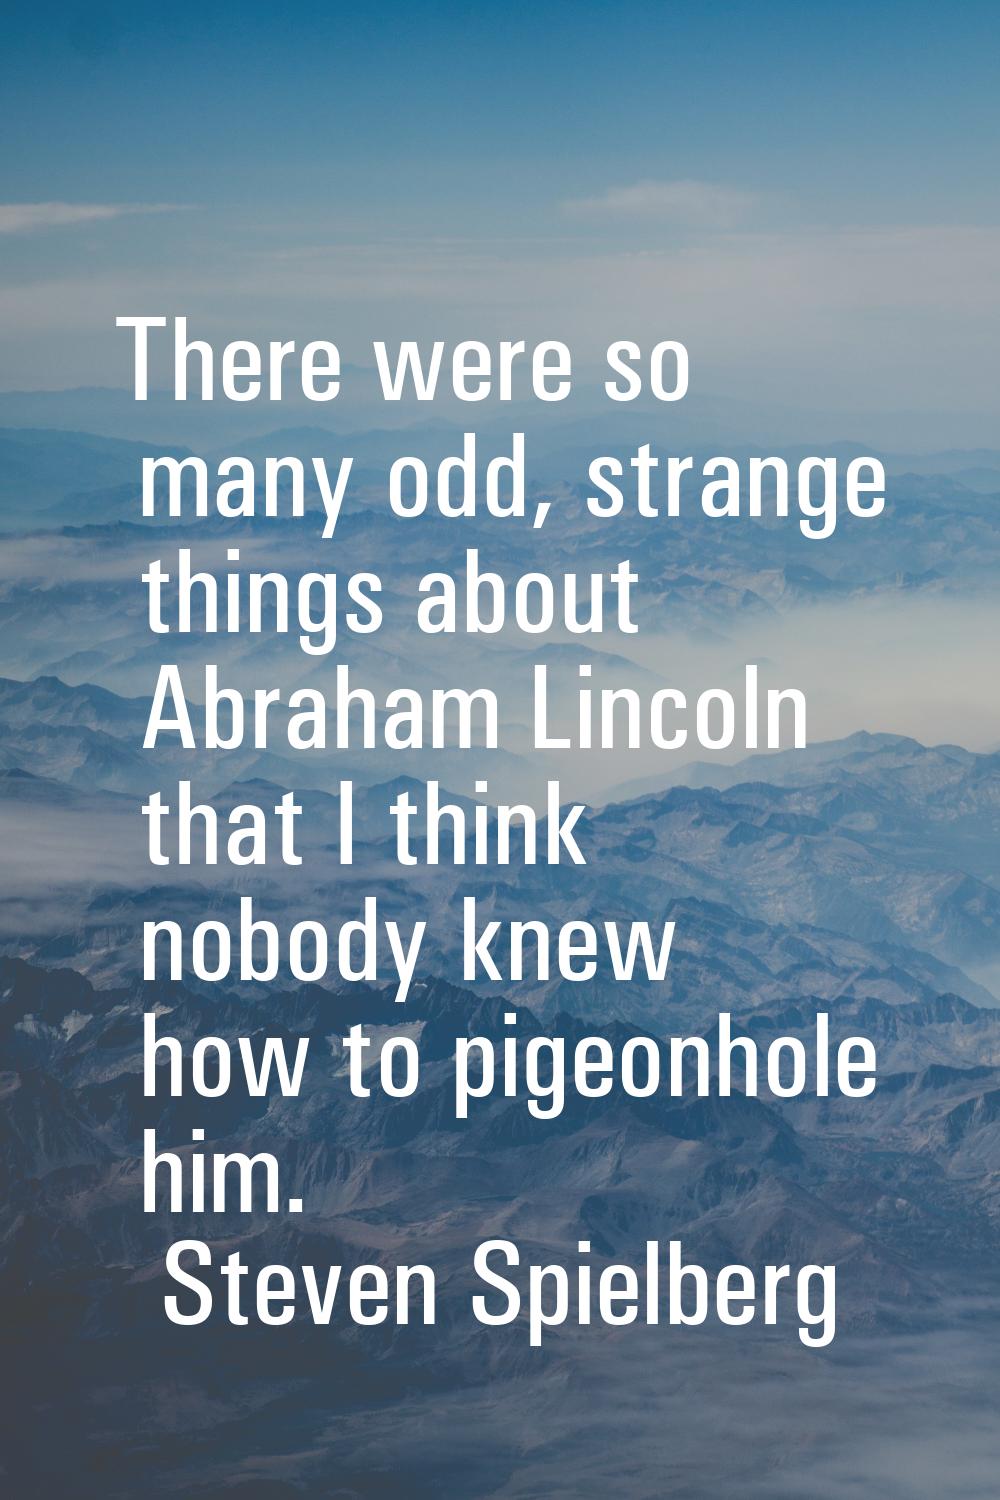 There were so many odd, strange things about Abraham Lincoln that I think nobody knew how to pigeon